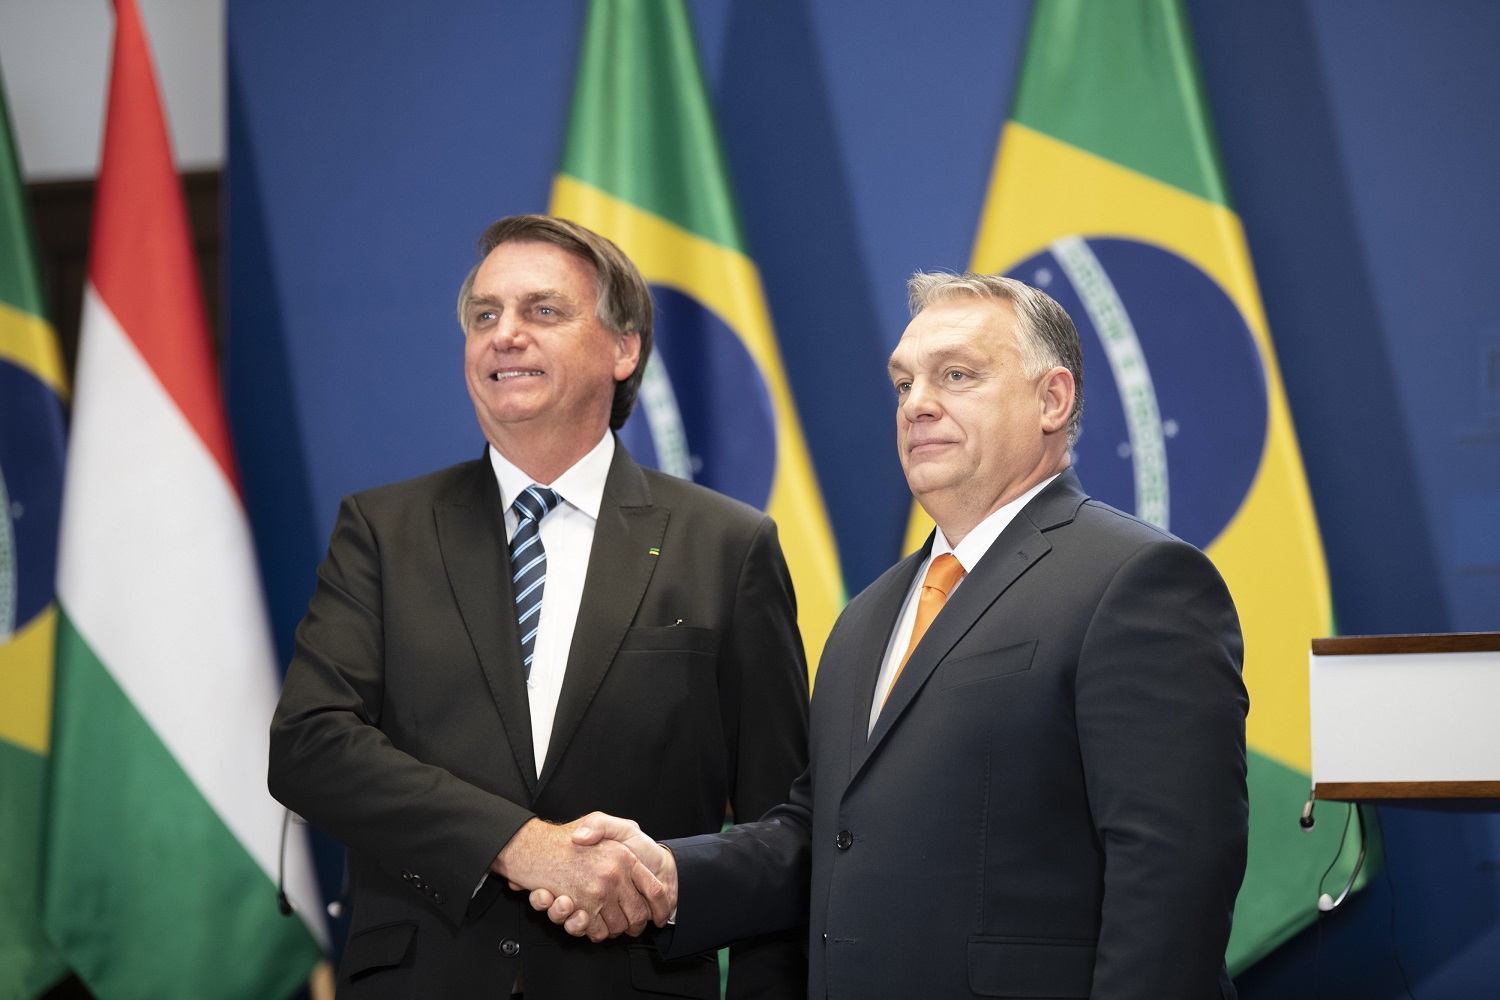 About Hungary PM Orbán Hungary and Brazil set up joint early warning